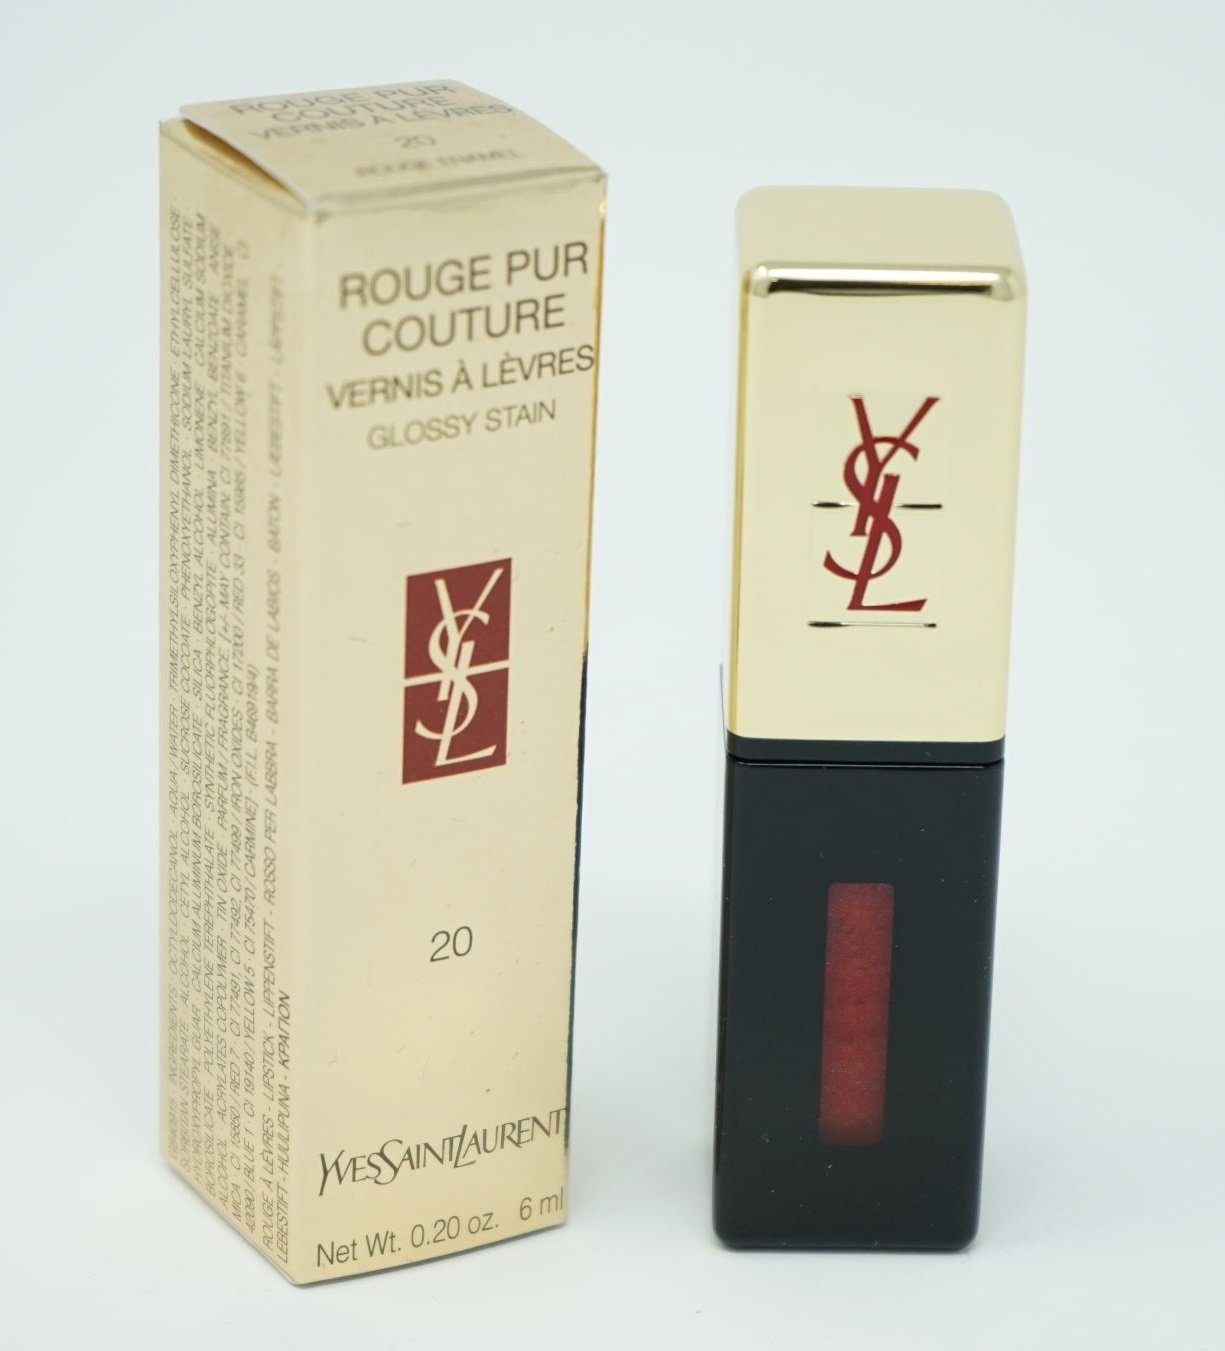 YVES SAINT LAURENT Lipgloss Yves Saint Laurent Rouge Pur Couture Vernis A Levres Glossy Stain